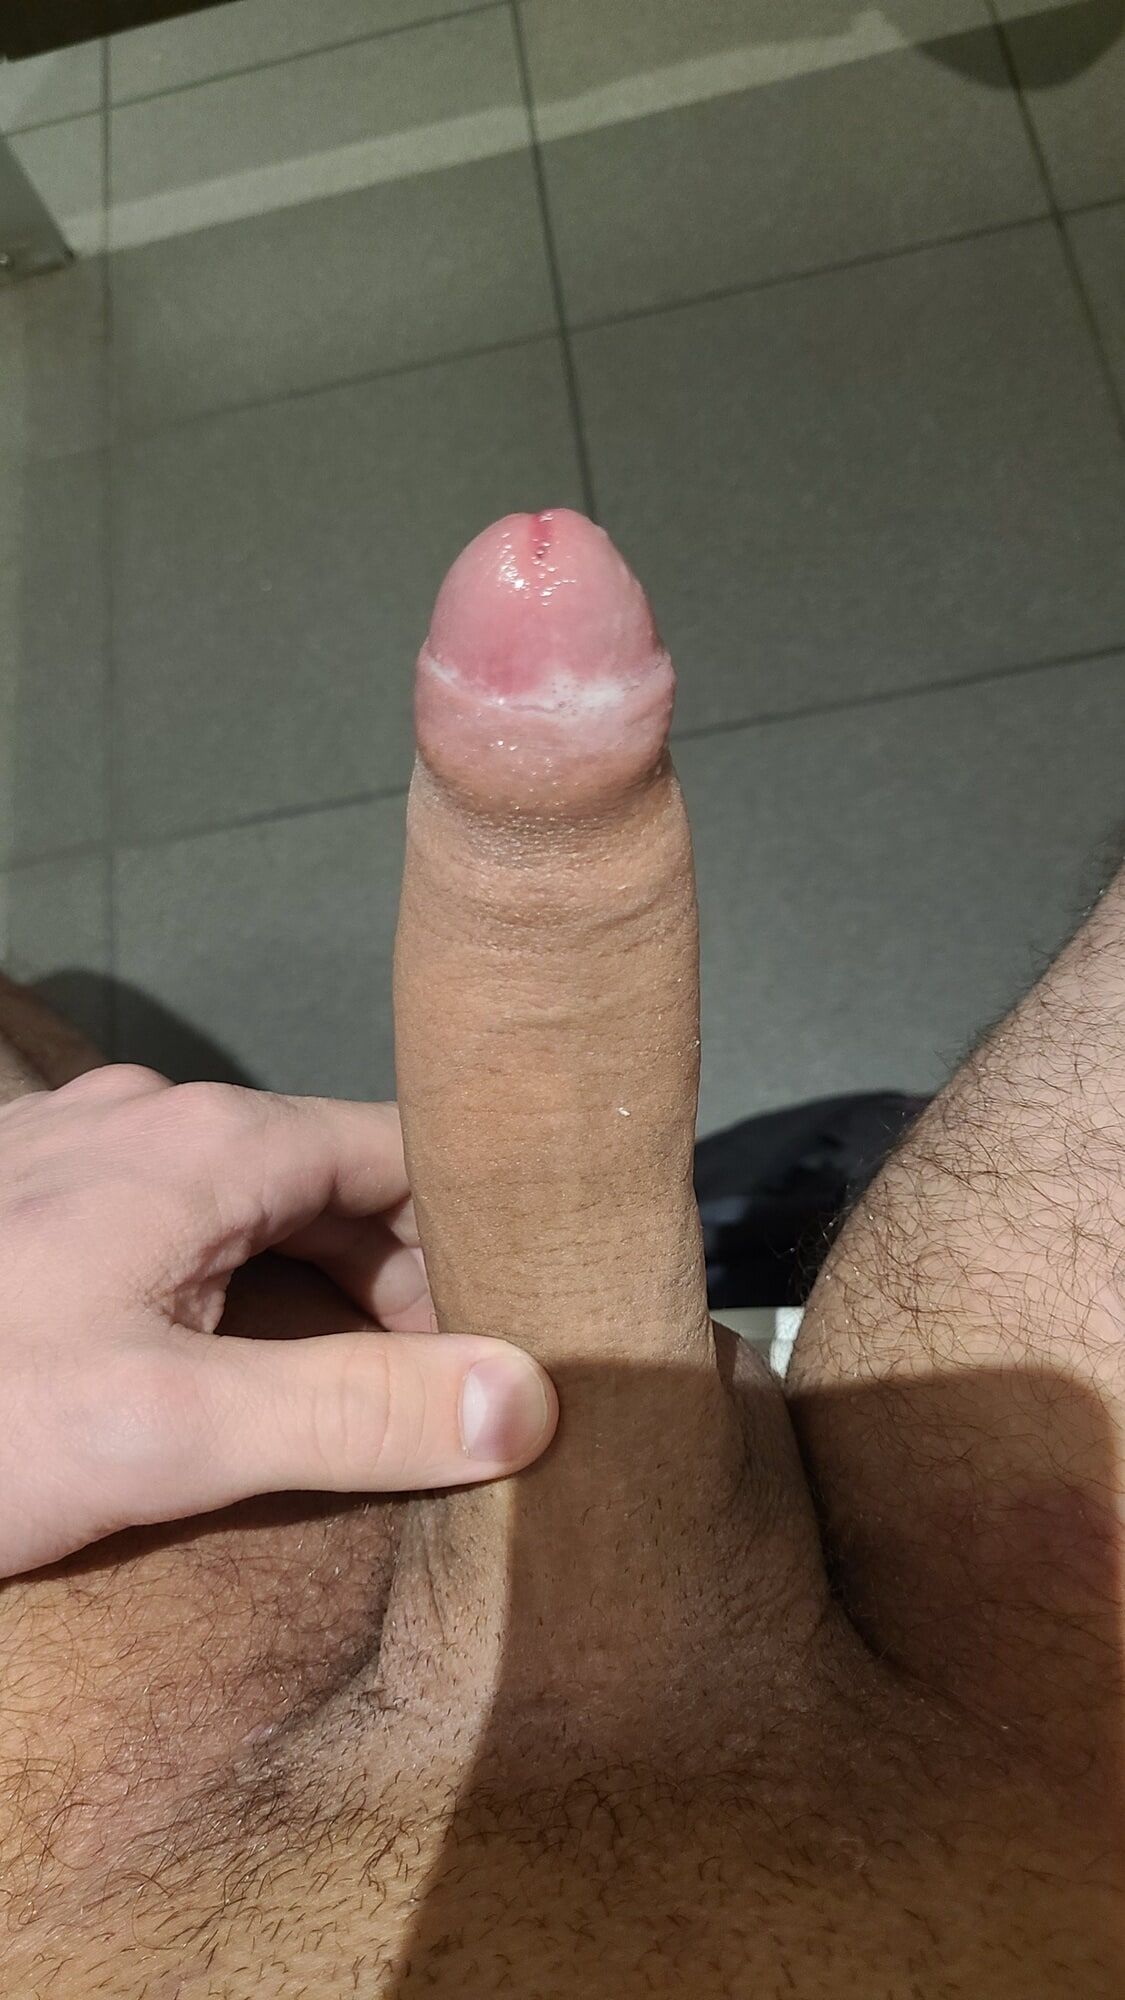 My Cock #8